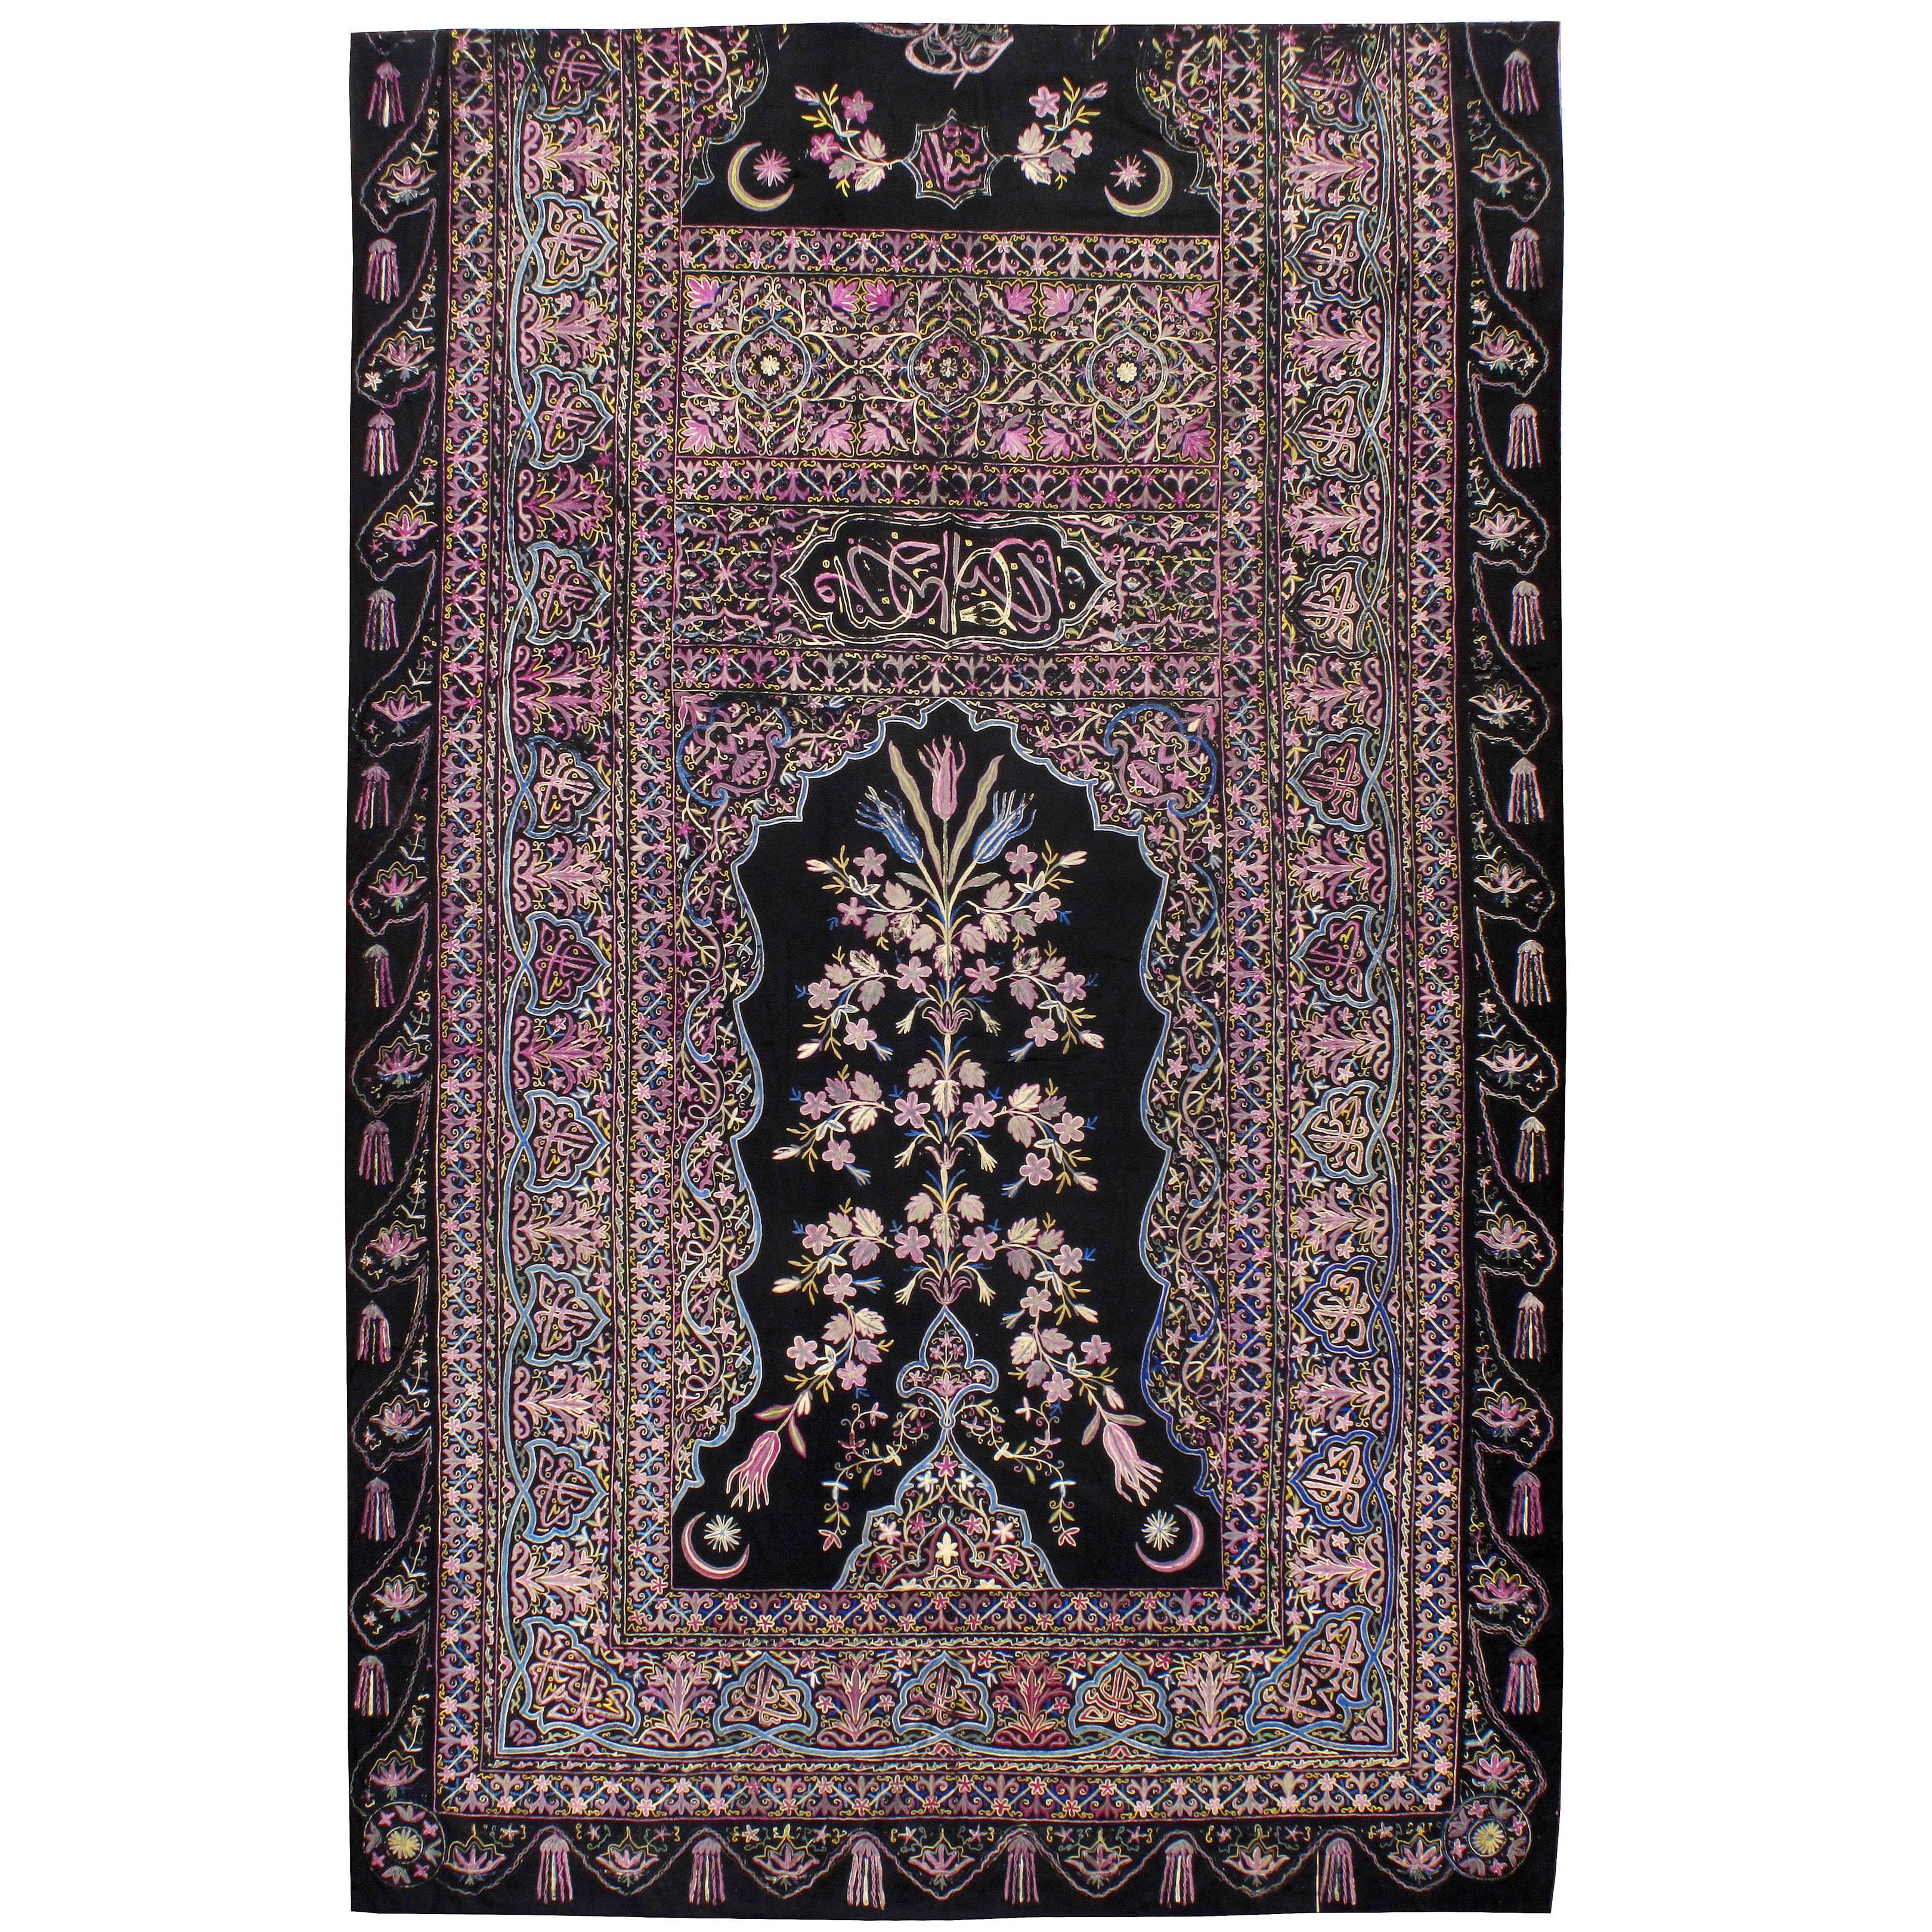 Antique Turkish Flat-Stiched Textile Tapestry For Sale